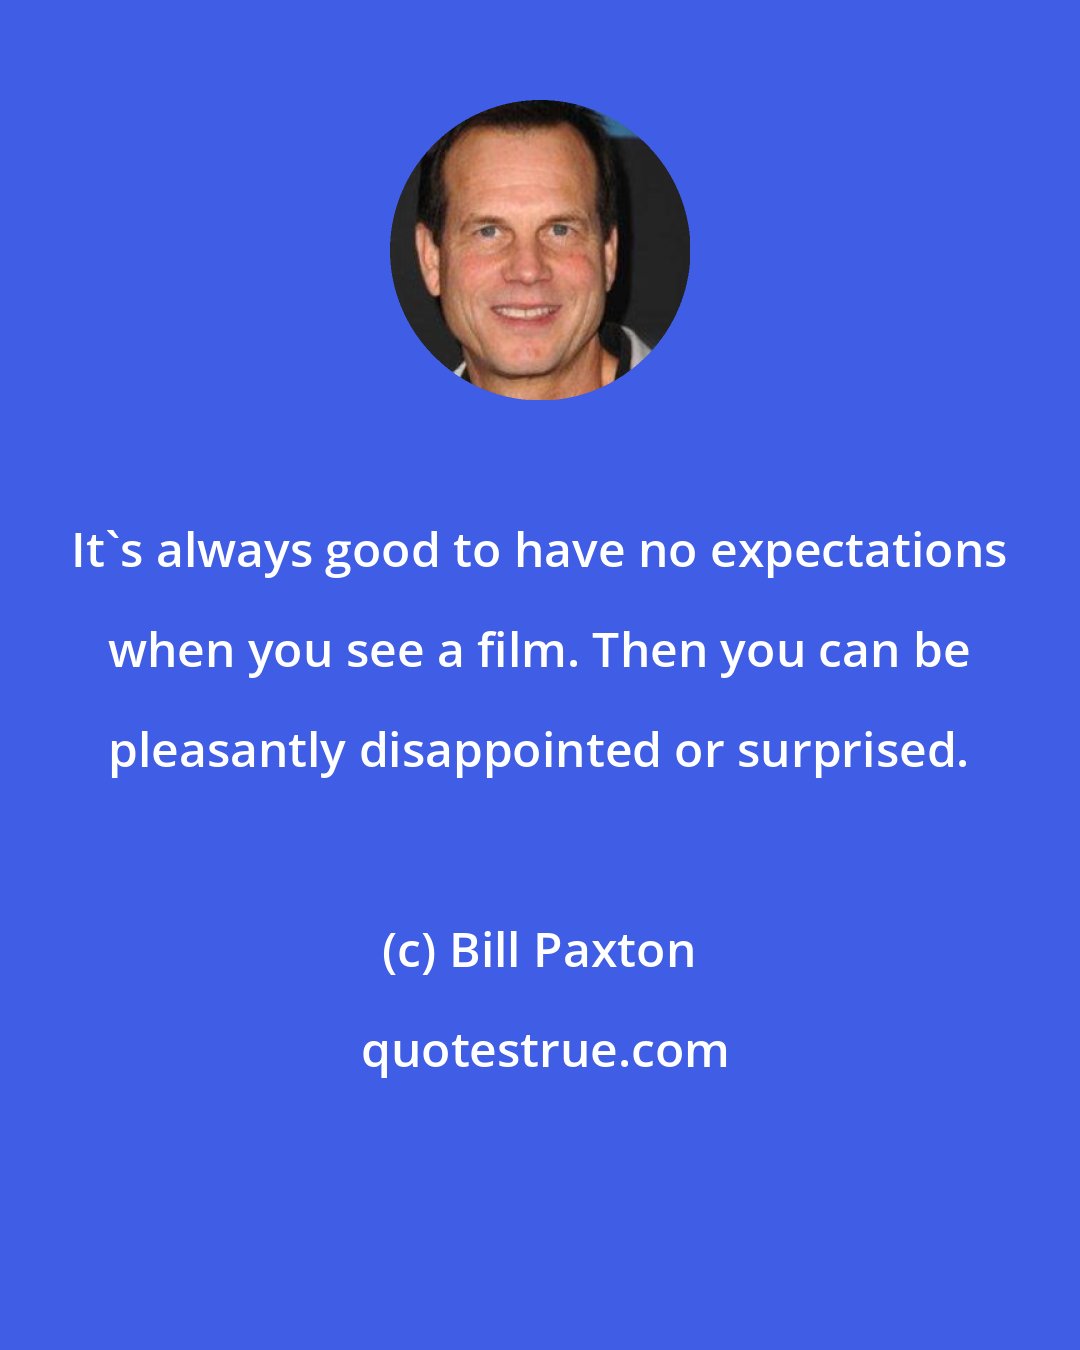 Bill Paxton: It's always good to have no expectations when you see a film. Then you can be pleasantly disappointed or surprised.